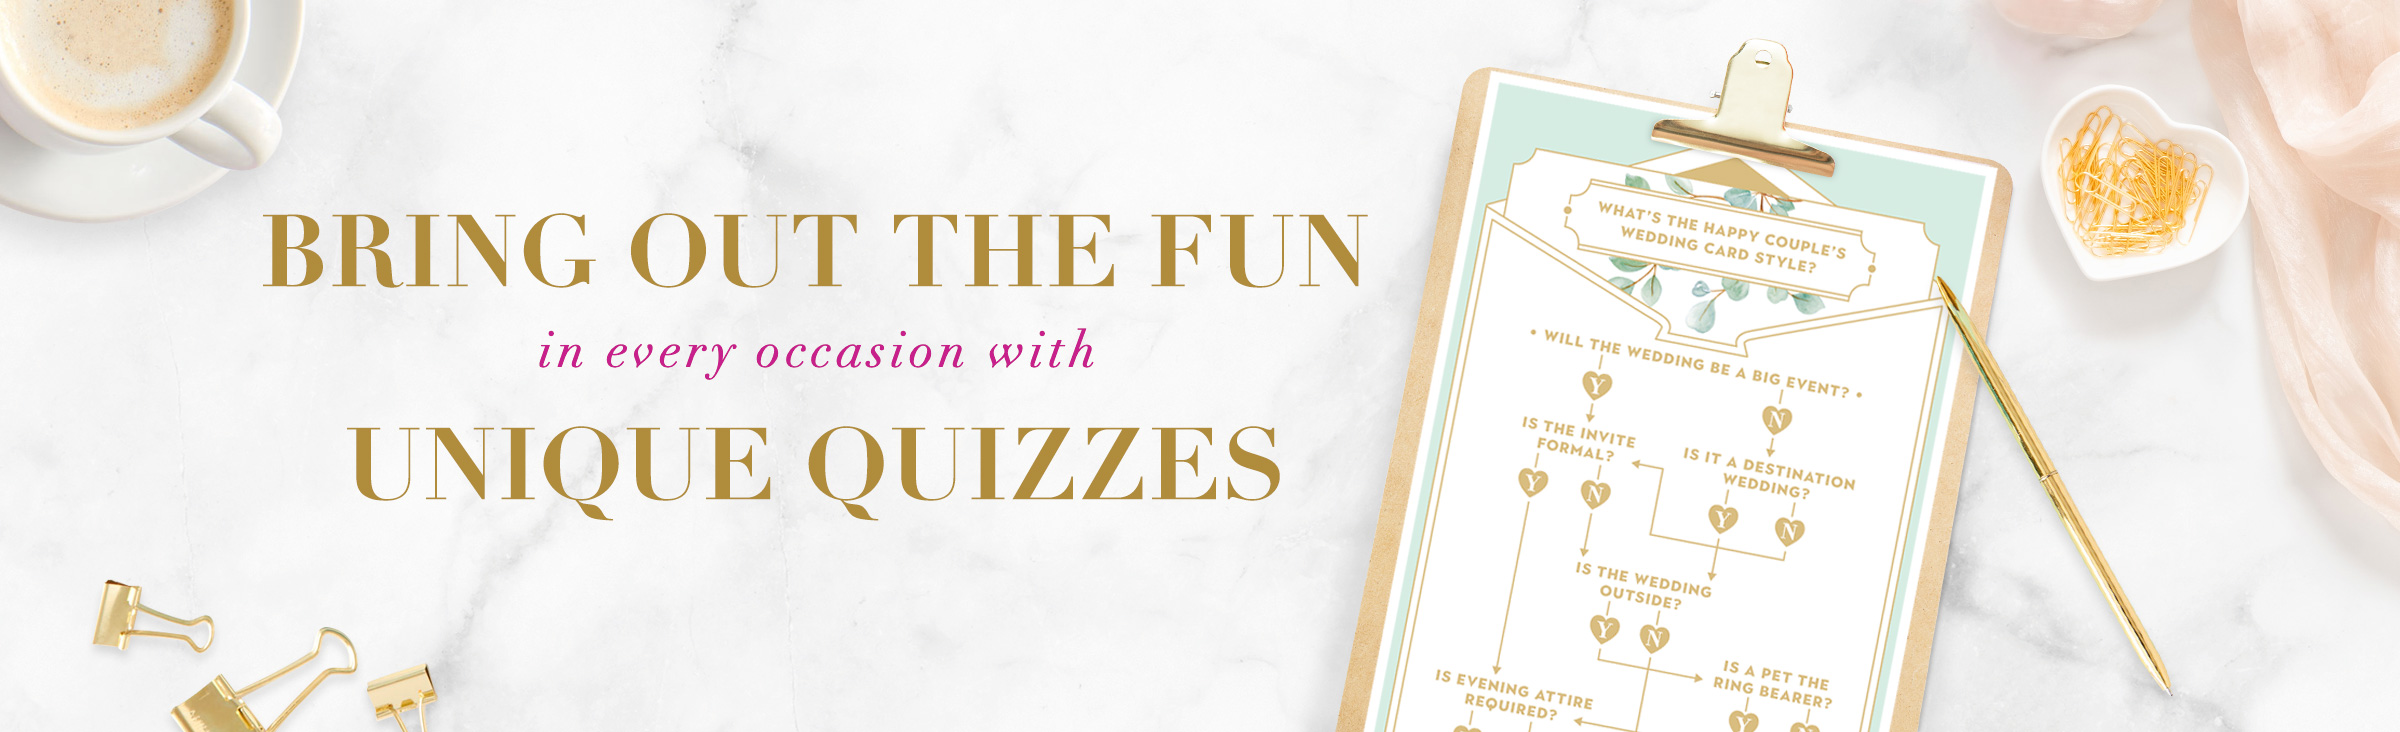 Bring out the fun in every occasion with unique quizzes